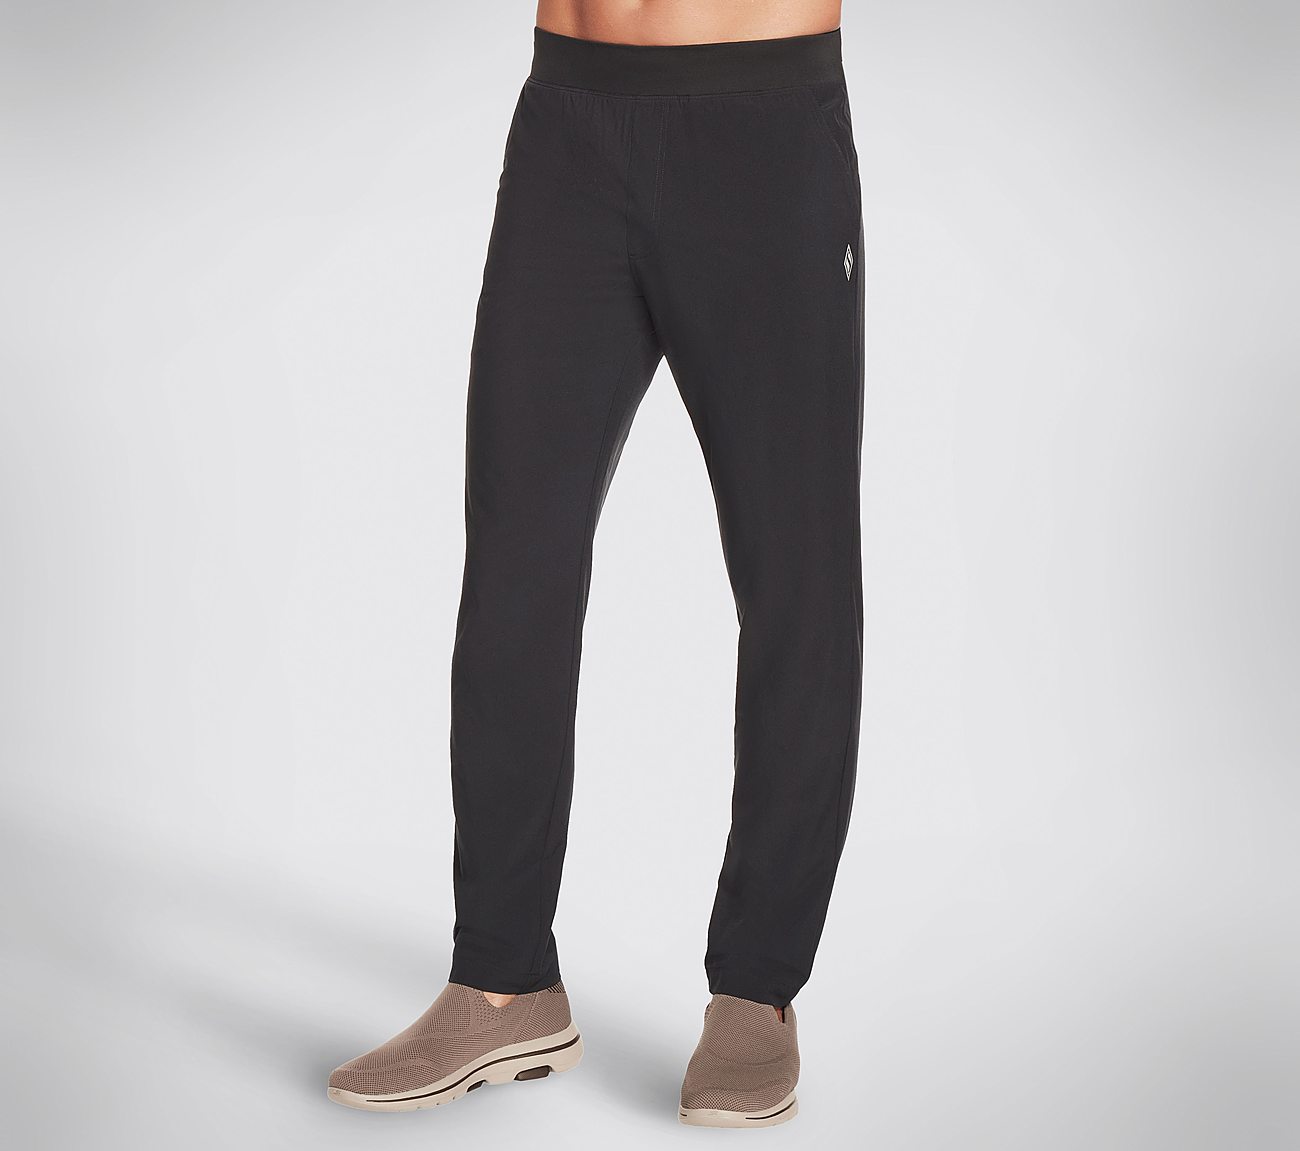 GO WALK ACTION PANT, BBBBLACK Apparel Lateral View